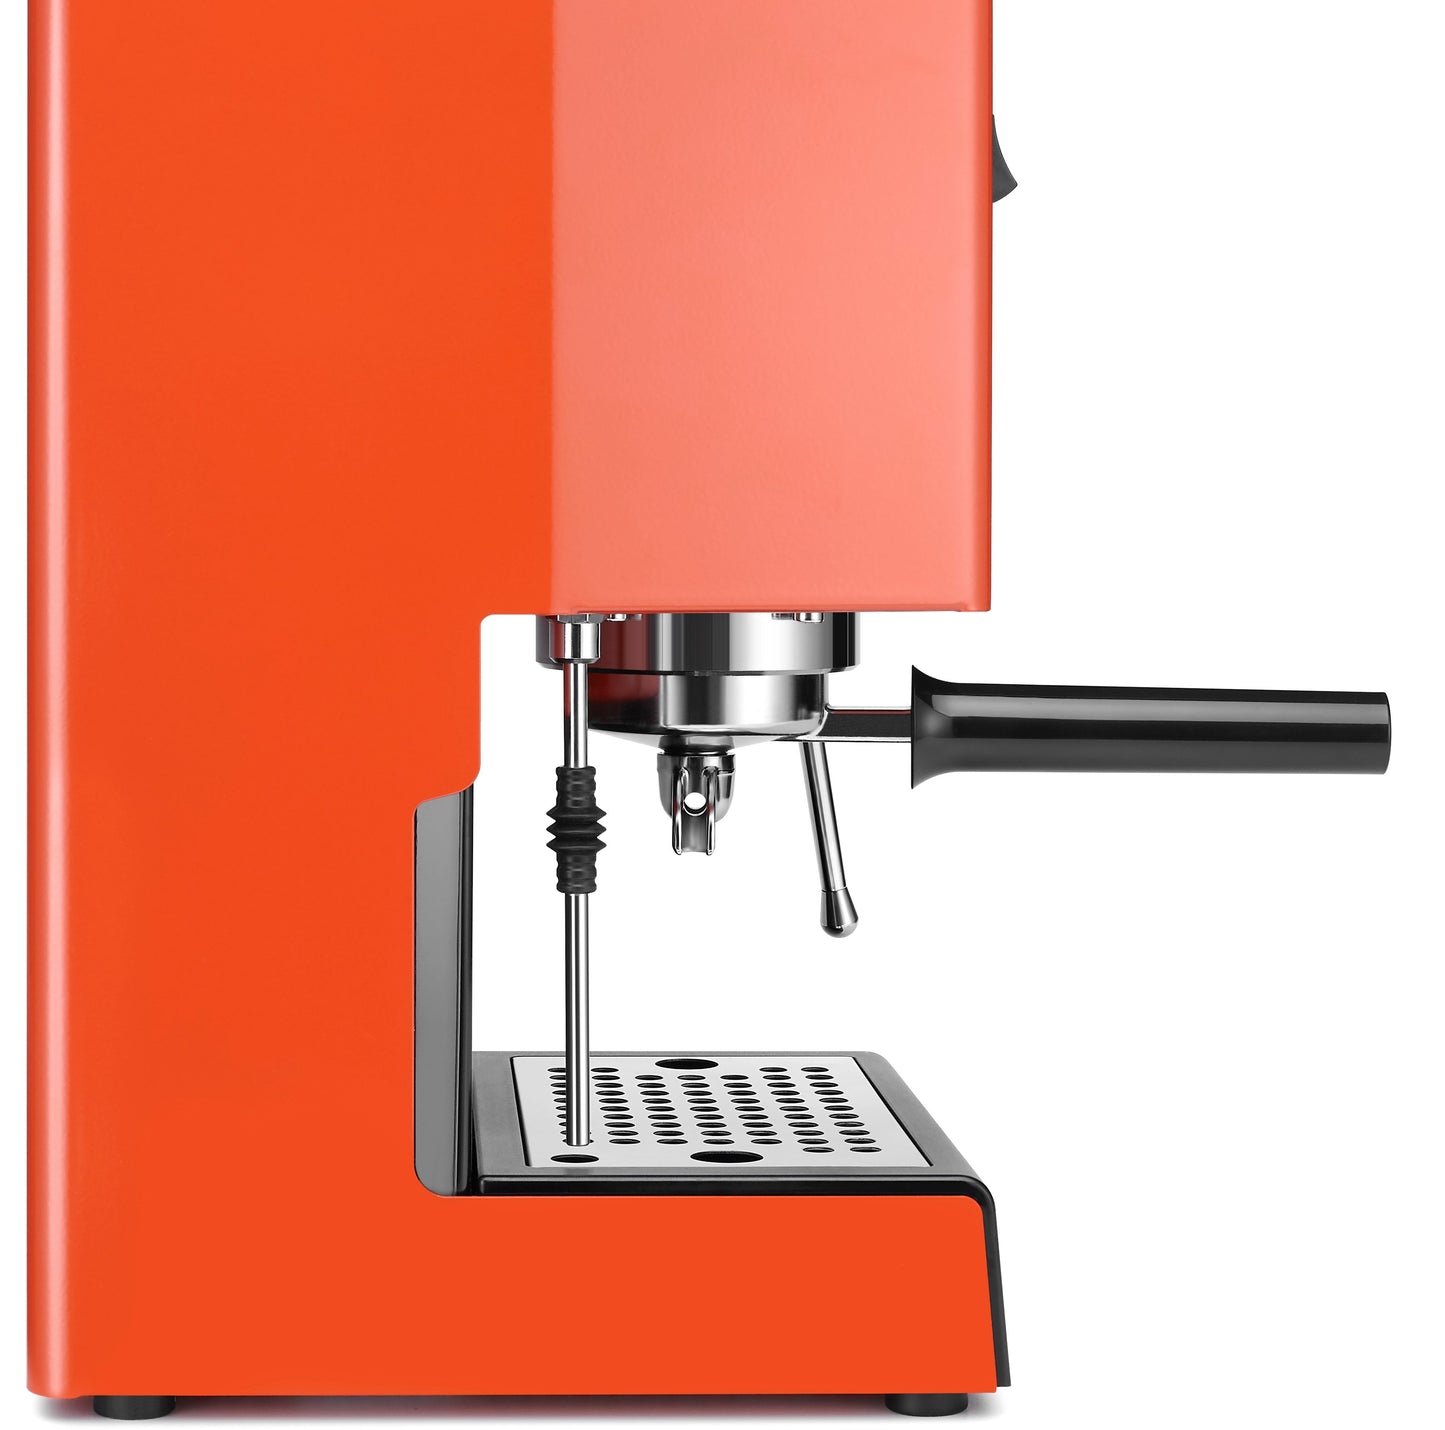 Classic EVO 2023 | 58mm SS Portafilter | Solenoid Valve | Professional Steam Wand | Orange | Made in Italy